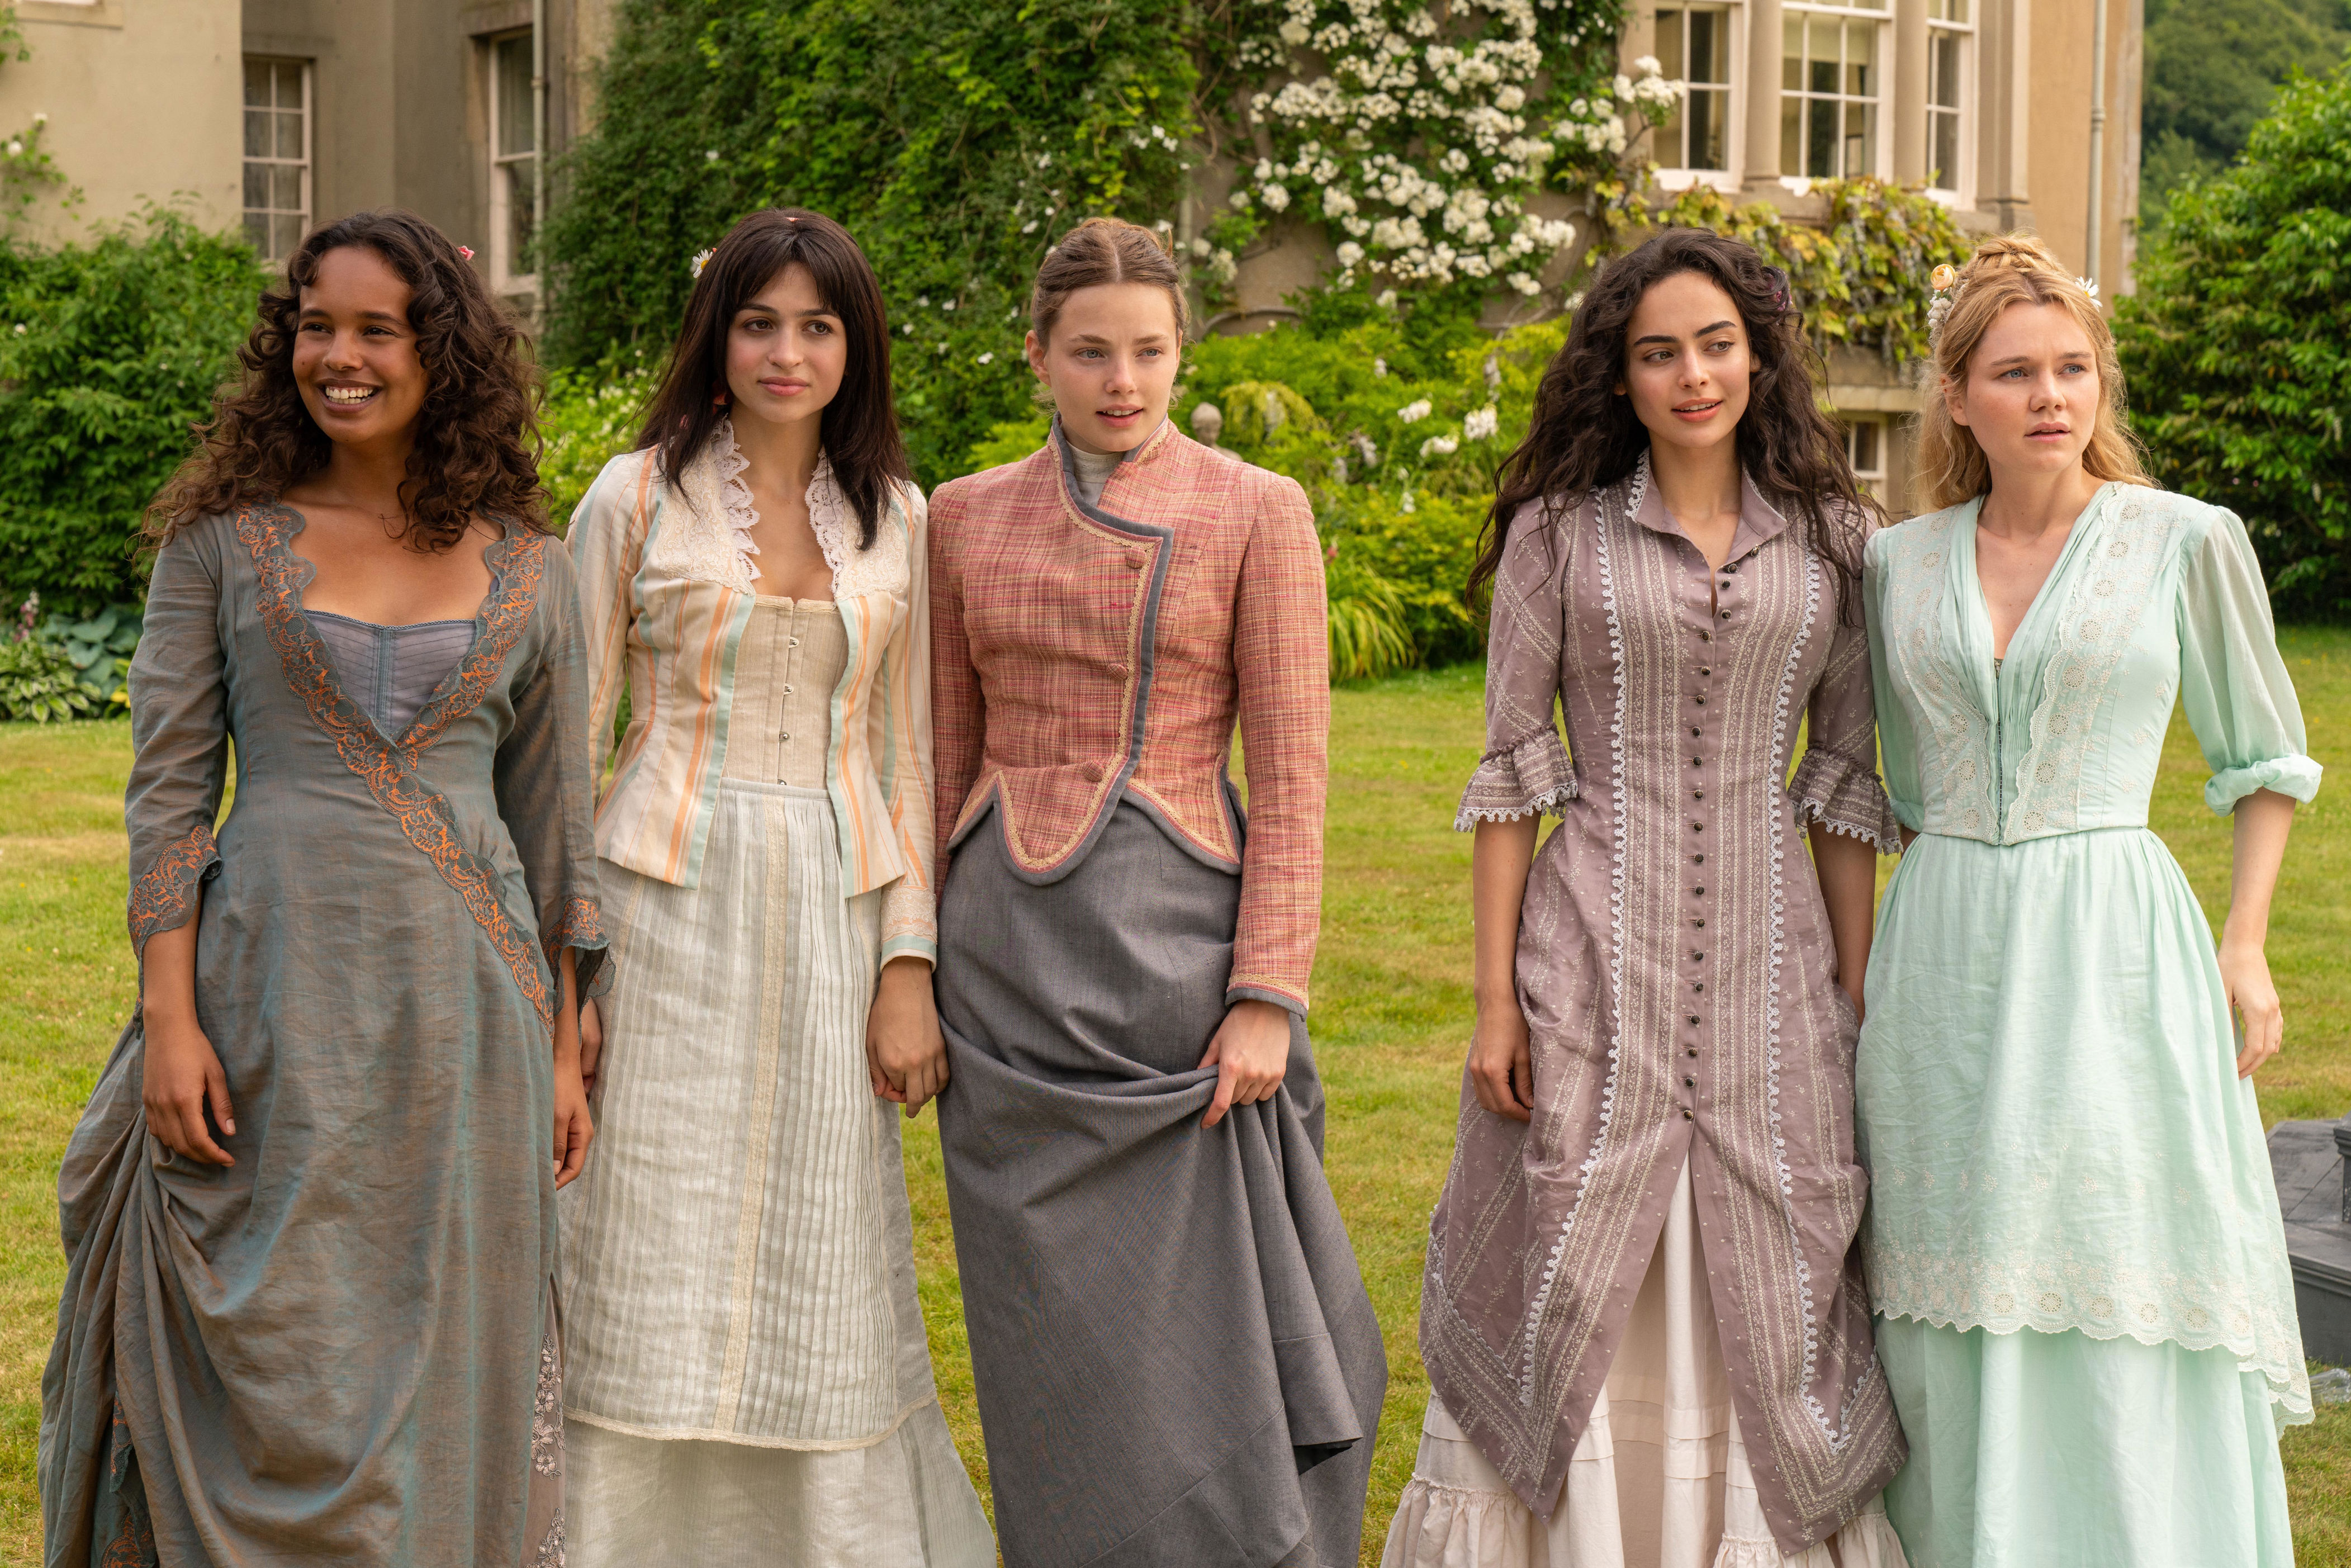 <p>"The Buccaneers" centers around a group of American débutantes -- played by Alisha Boe, Josie Totah, Kristine Frøseth, Aubri Ibrag and Imogen Waterhouse -- looking for love in London, where their modern sensibilities are at odds with the traditions of English high society in the 1870s. The first season of the Apple TV+ drama -- which is based on Edith Wharton's unfinished novel of the same name, published posthumously in 1938 -- debuted in late 2023. A second season is currently in the works. (Season 1 earned decent reviews from critics but was a HUGE hit with fans, scoring a 94% fresh rating from audiences on Rotten Tomatoes.)</p>